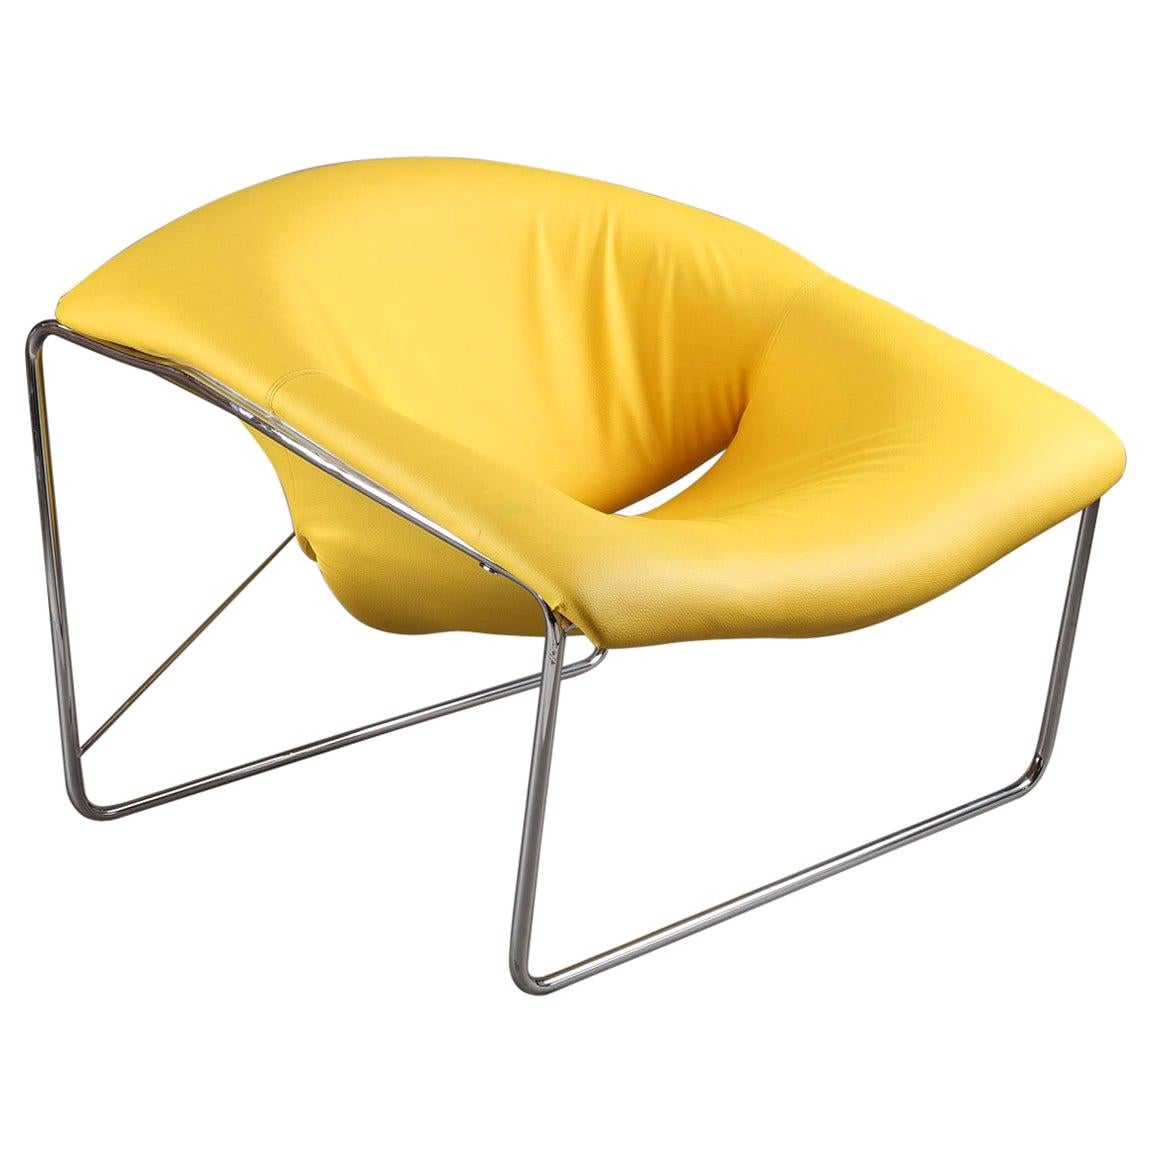 Cubique Chair with Steel Frame and Yellow Leather-Like Basis